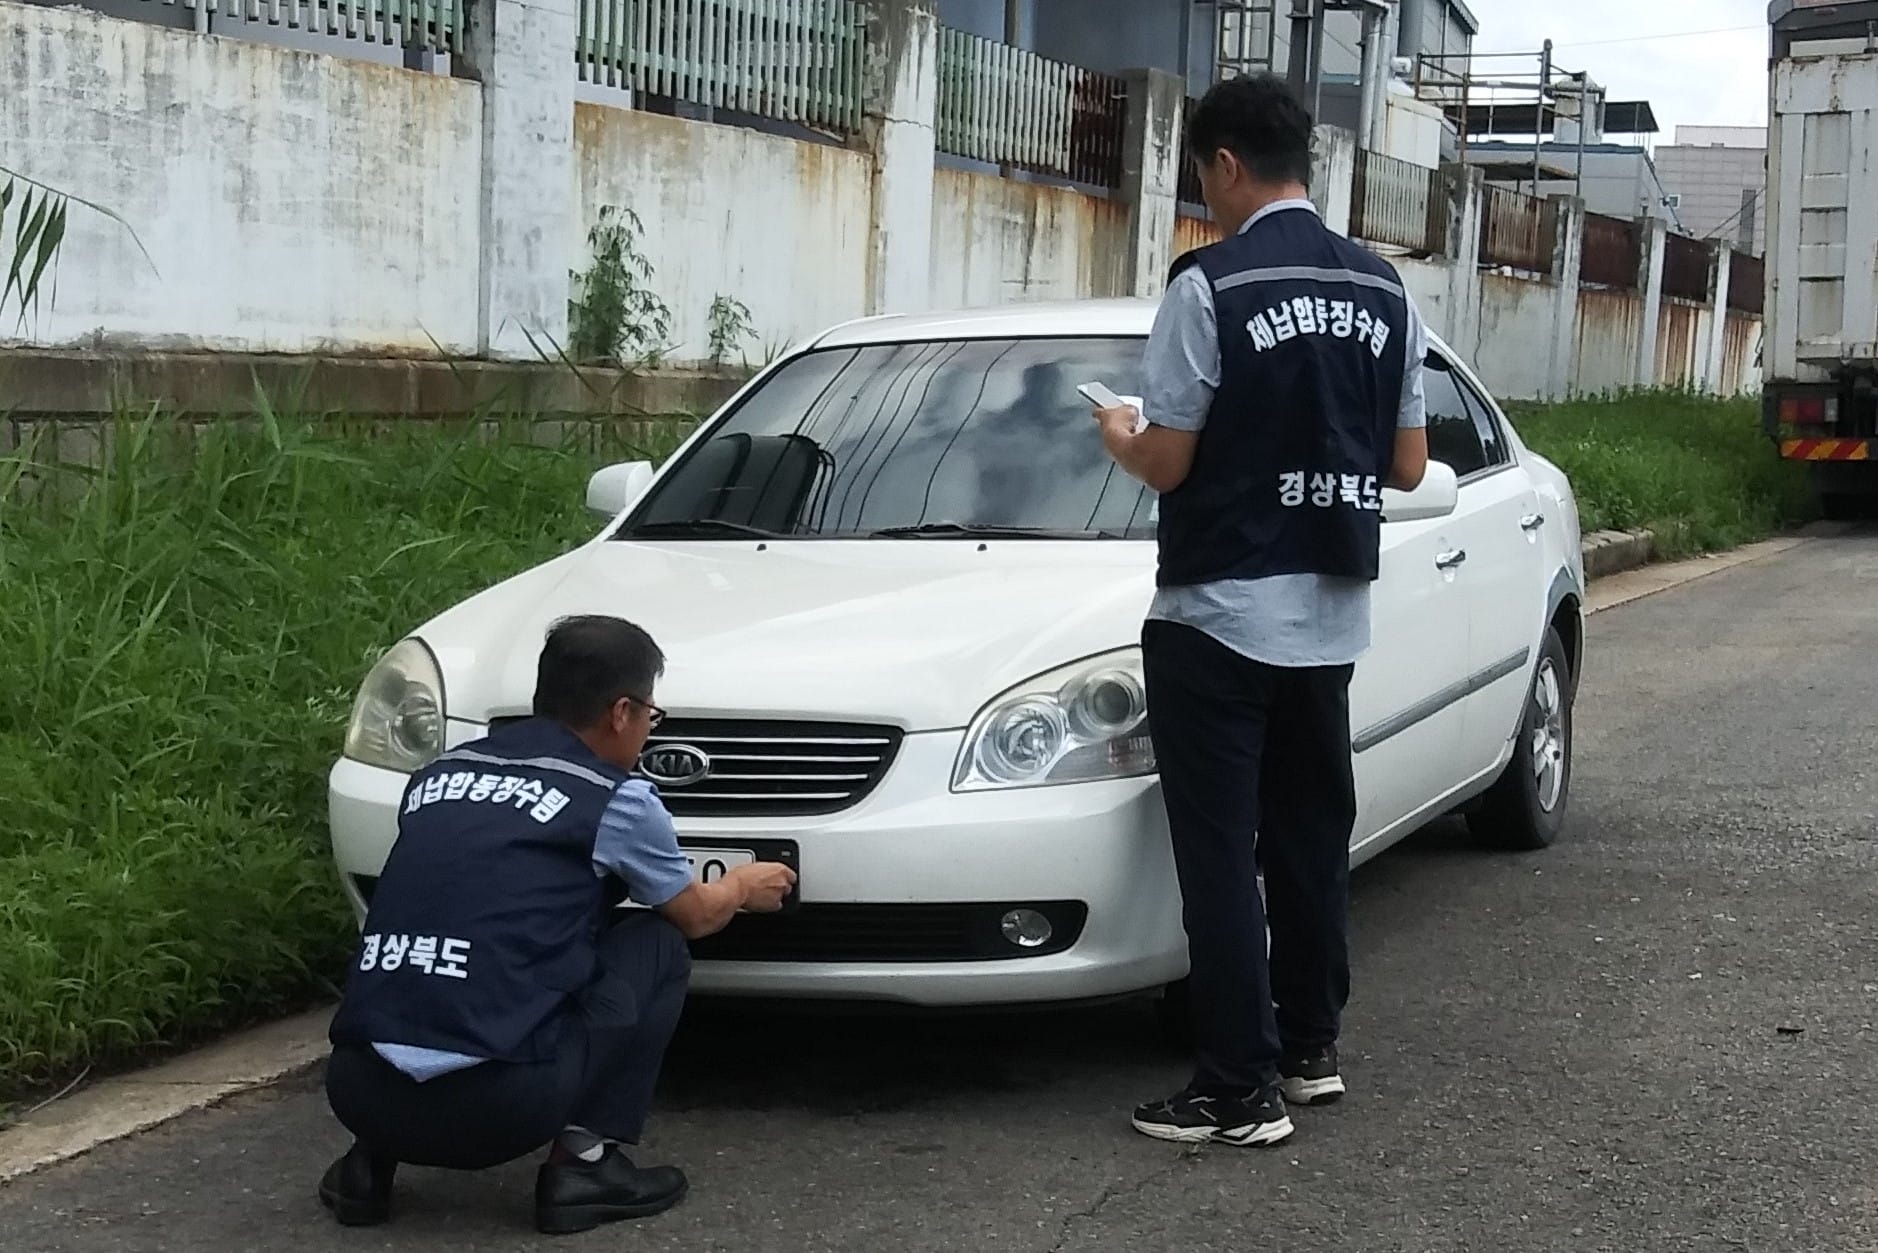 Officials from Yeongcheon’s local authority remove a car license plate as part of unpaid tax-related asset seizures.